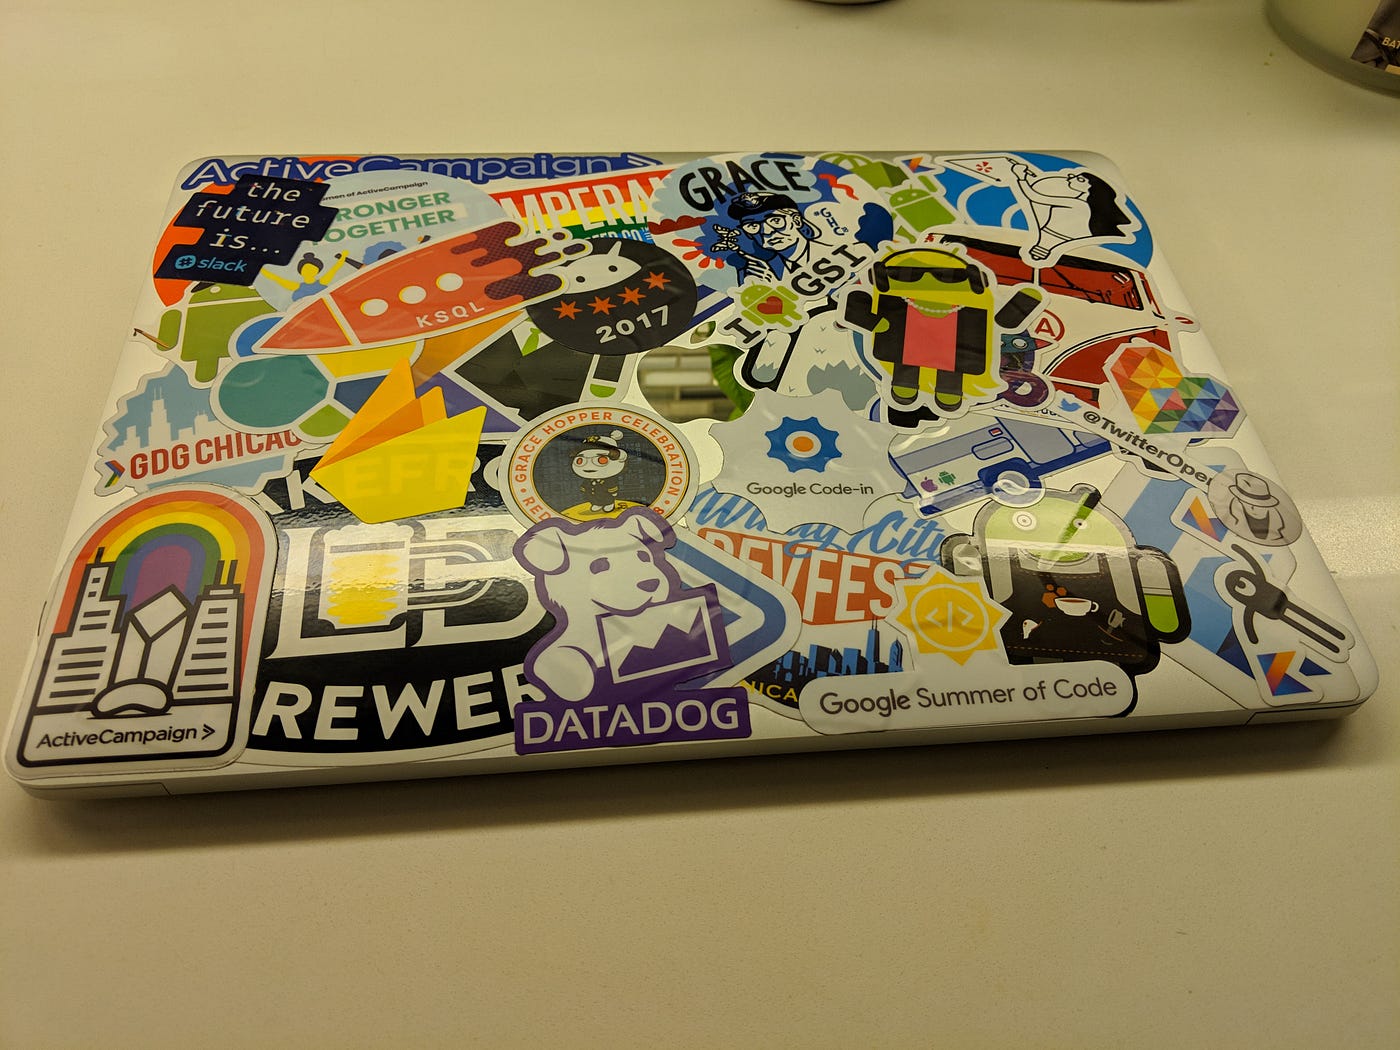 How To Remove Stickers From Your Work Laptop After Receiving a New Job. |  by Cody Engel | Medium